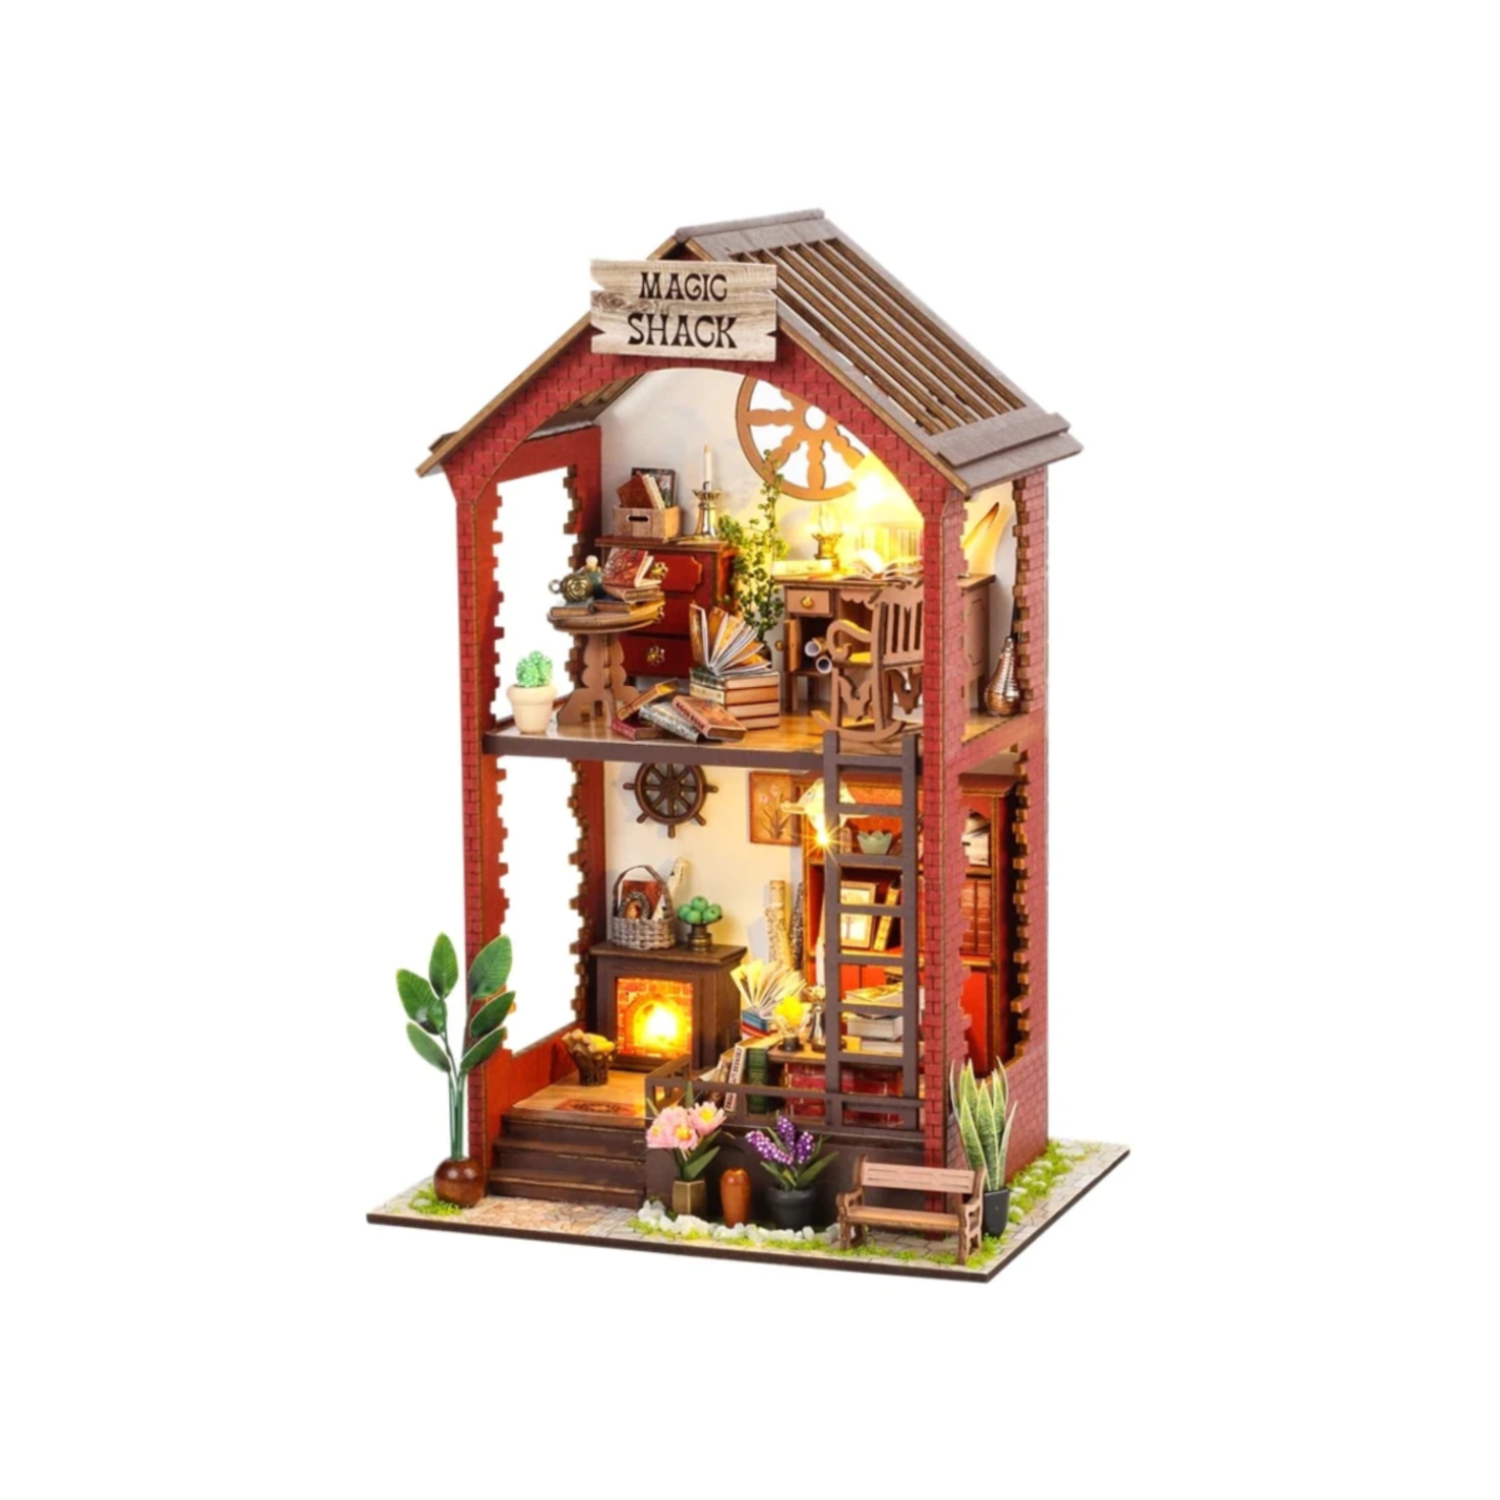 Magic Shack DIY Wooden Dollhouse kit with furniture